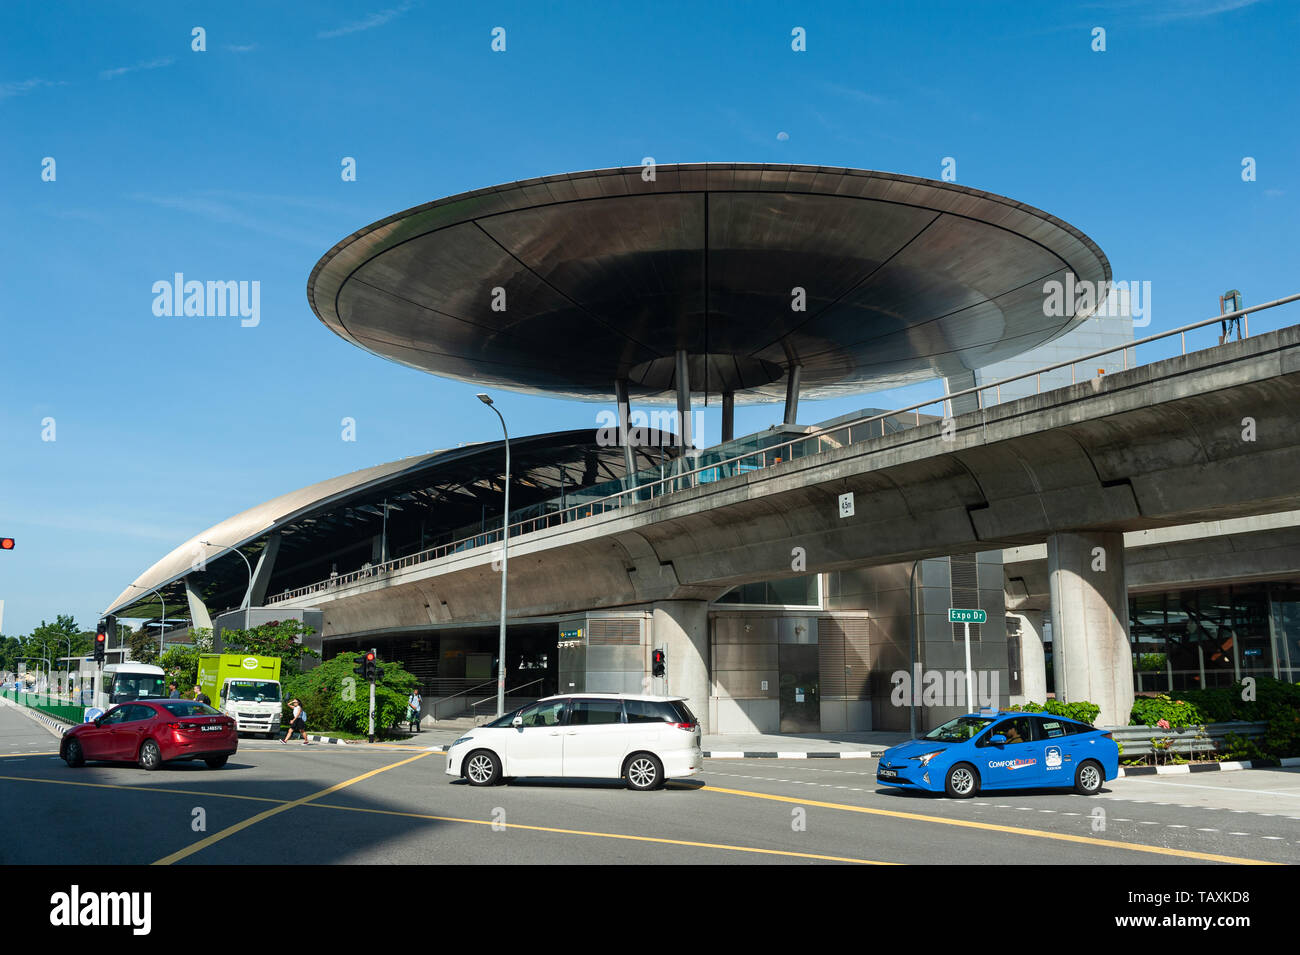 24.05.2019, Singapore, Republic of Singapore, Asia - Exterior view of the Expo station along the MRT network, designed by architect Norman Foster. Stock Photo